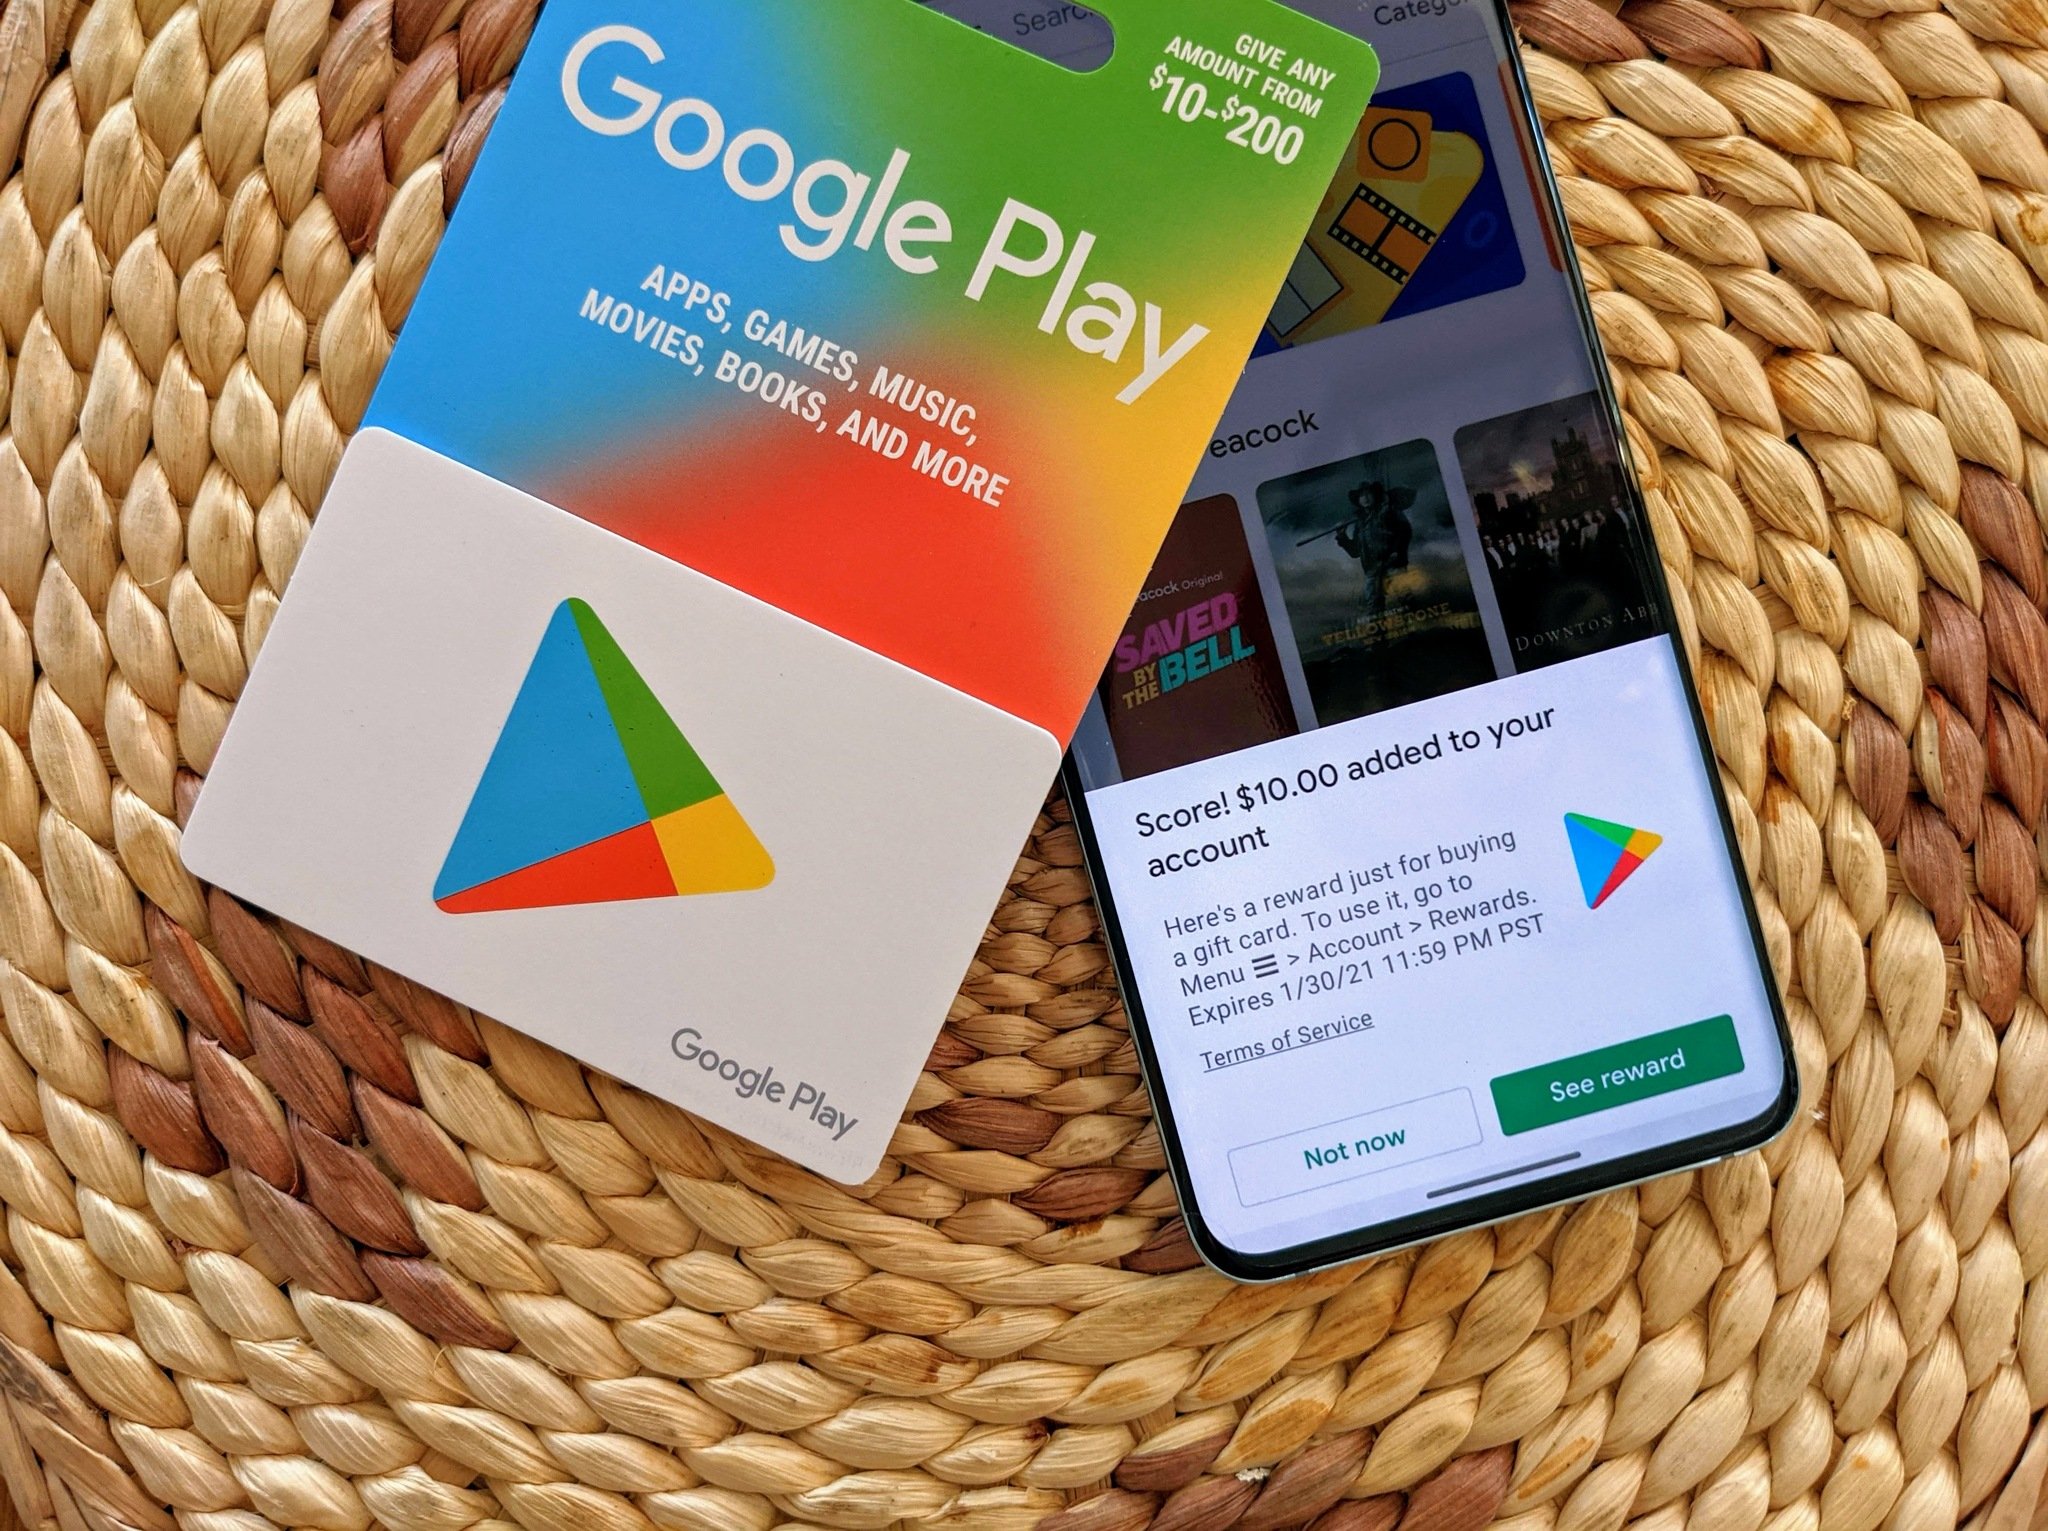 How to use a Google Play gift card | Android Central